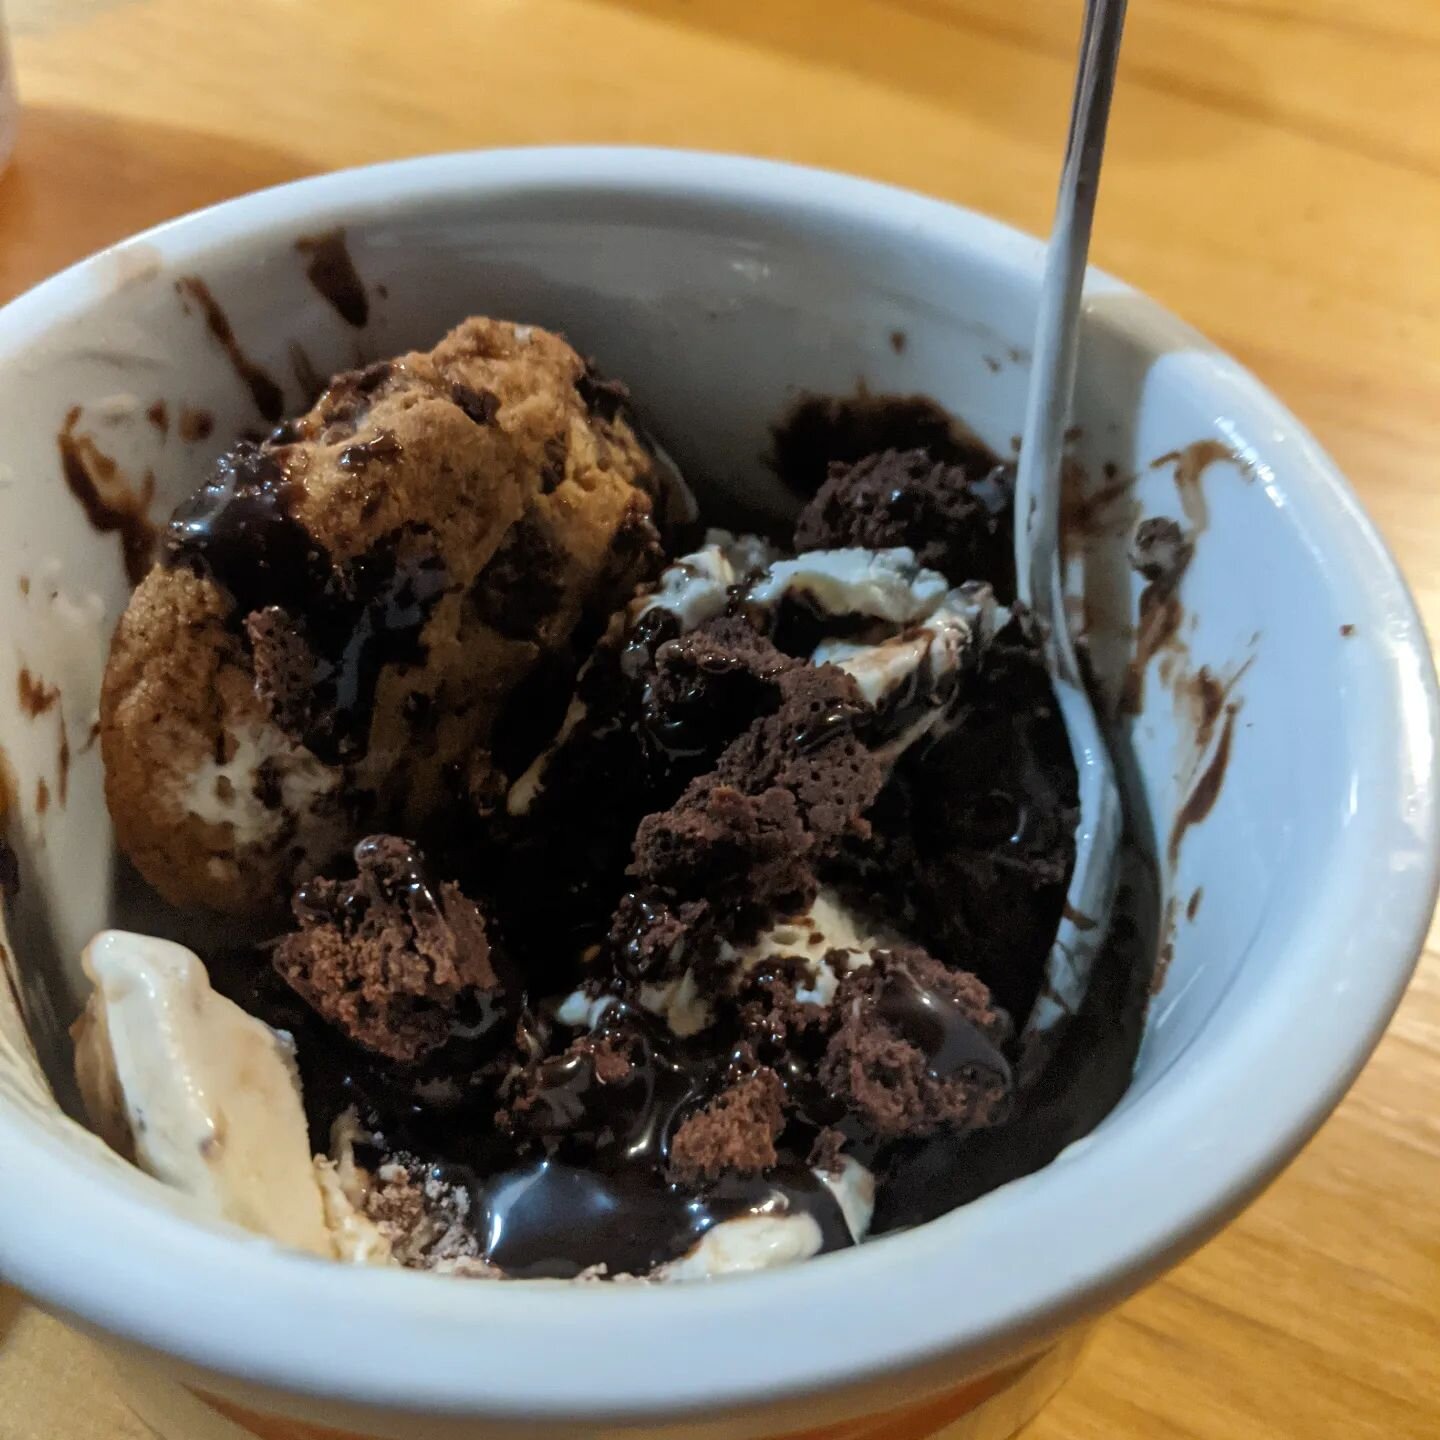 Finishing today's race calls for a treat.

Americone Dream ice cream topped with @wyattswickedgoods fudgy brownies and Choco Chunk cookies.

I burned over 1500 calories, so it's okay.

#halfmarathon #newenglandhalfmarathon #newenglandhalf #dessert #r